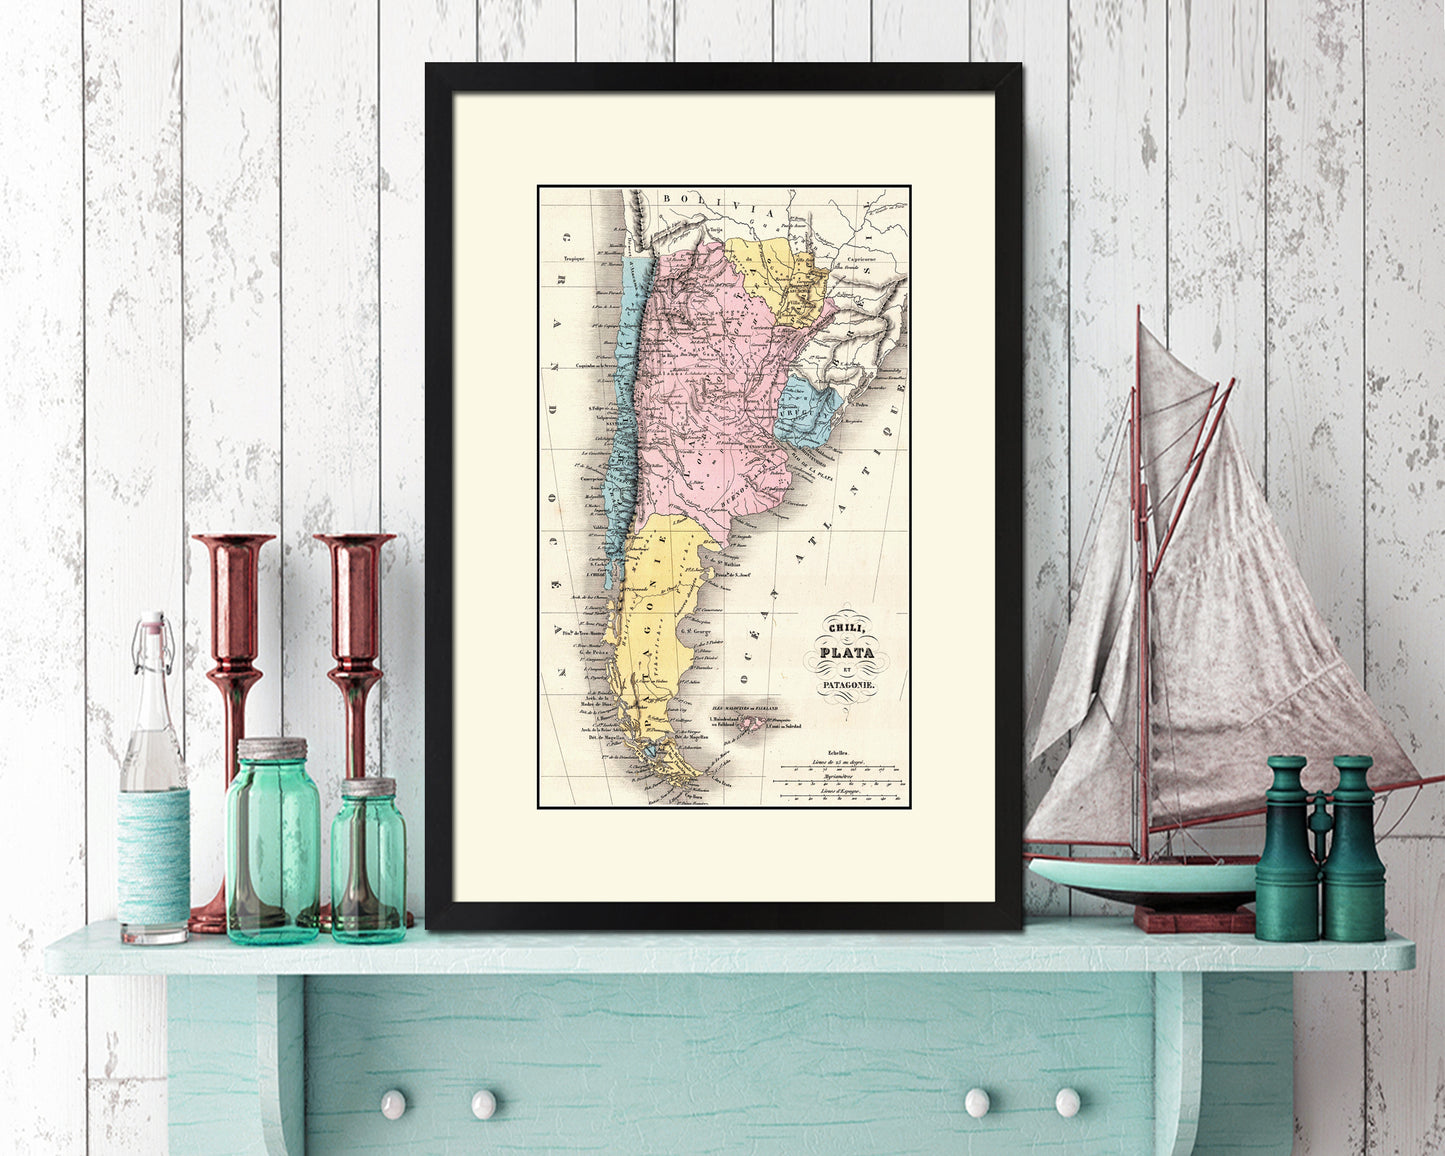 Argentina Chile Patagonia Old Map Wood Framed Print Art Wall Decor Gifts